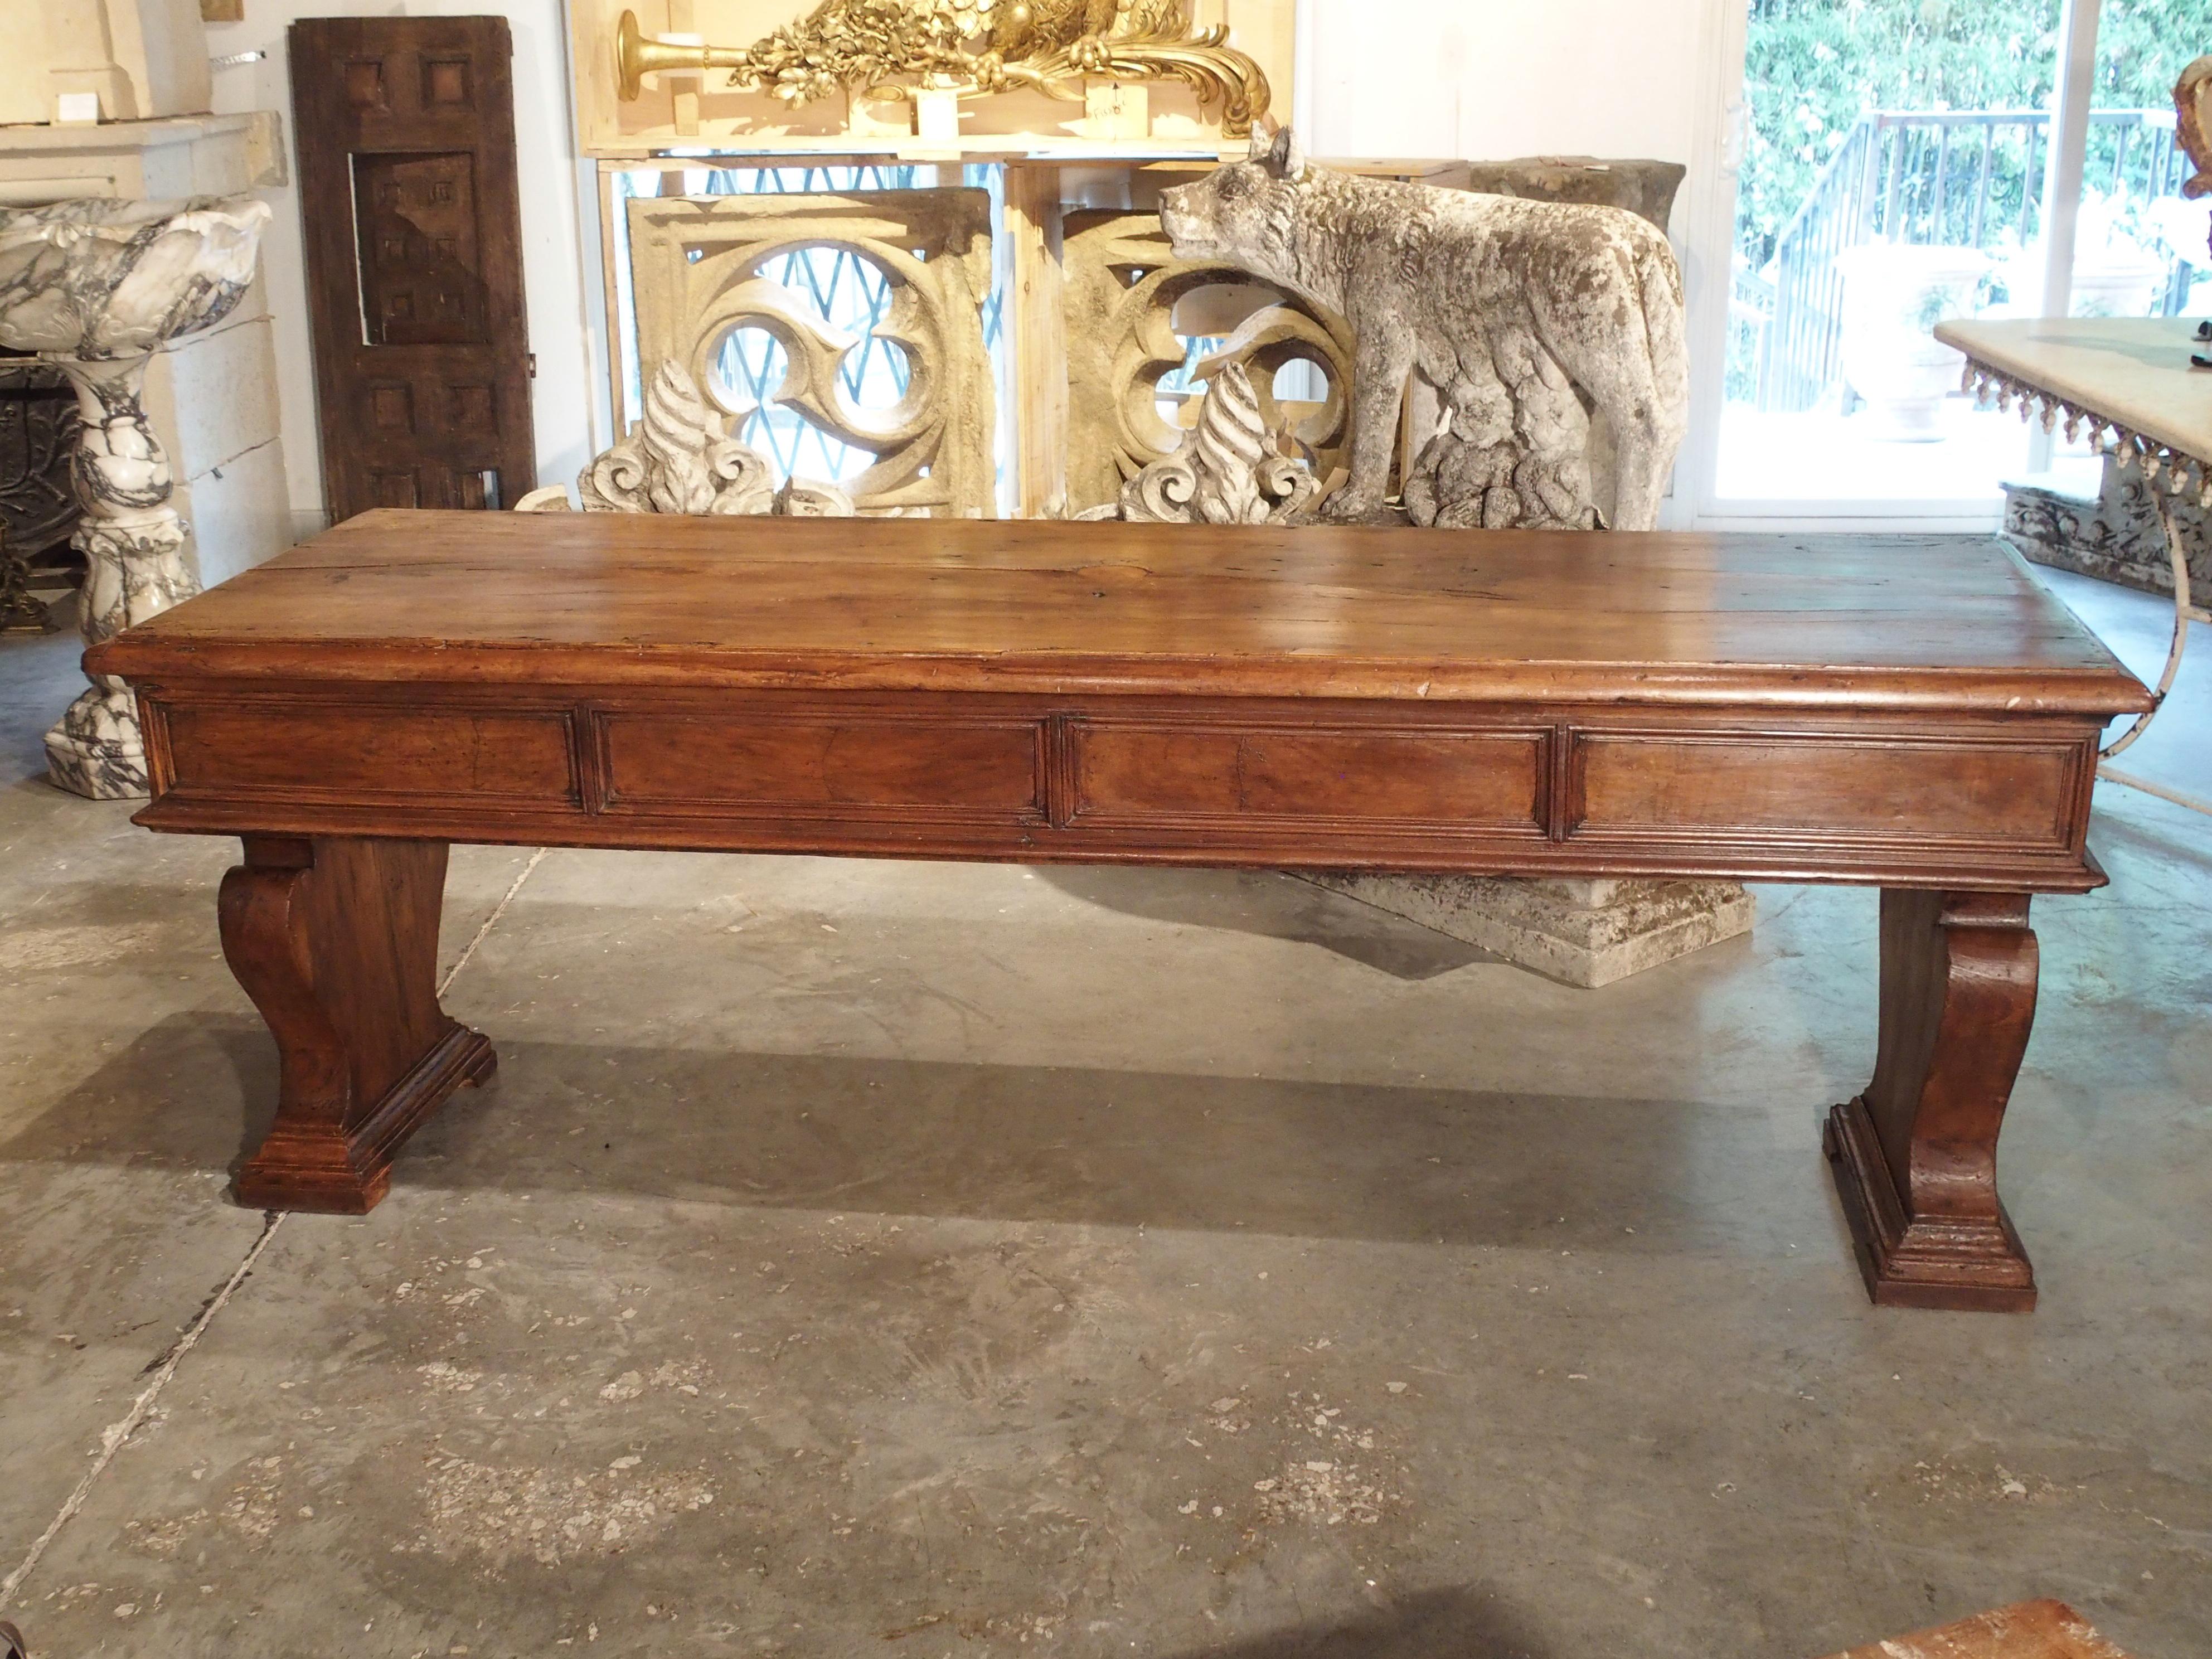 19th Century Walnut Wood Refectory Table from Italy 16